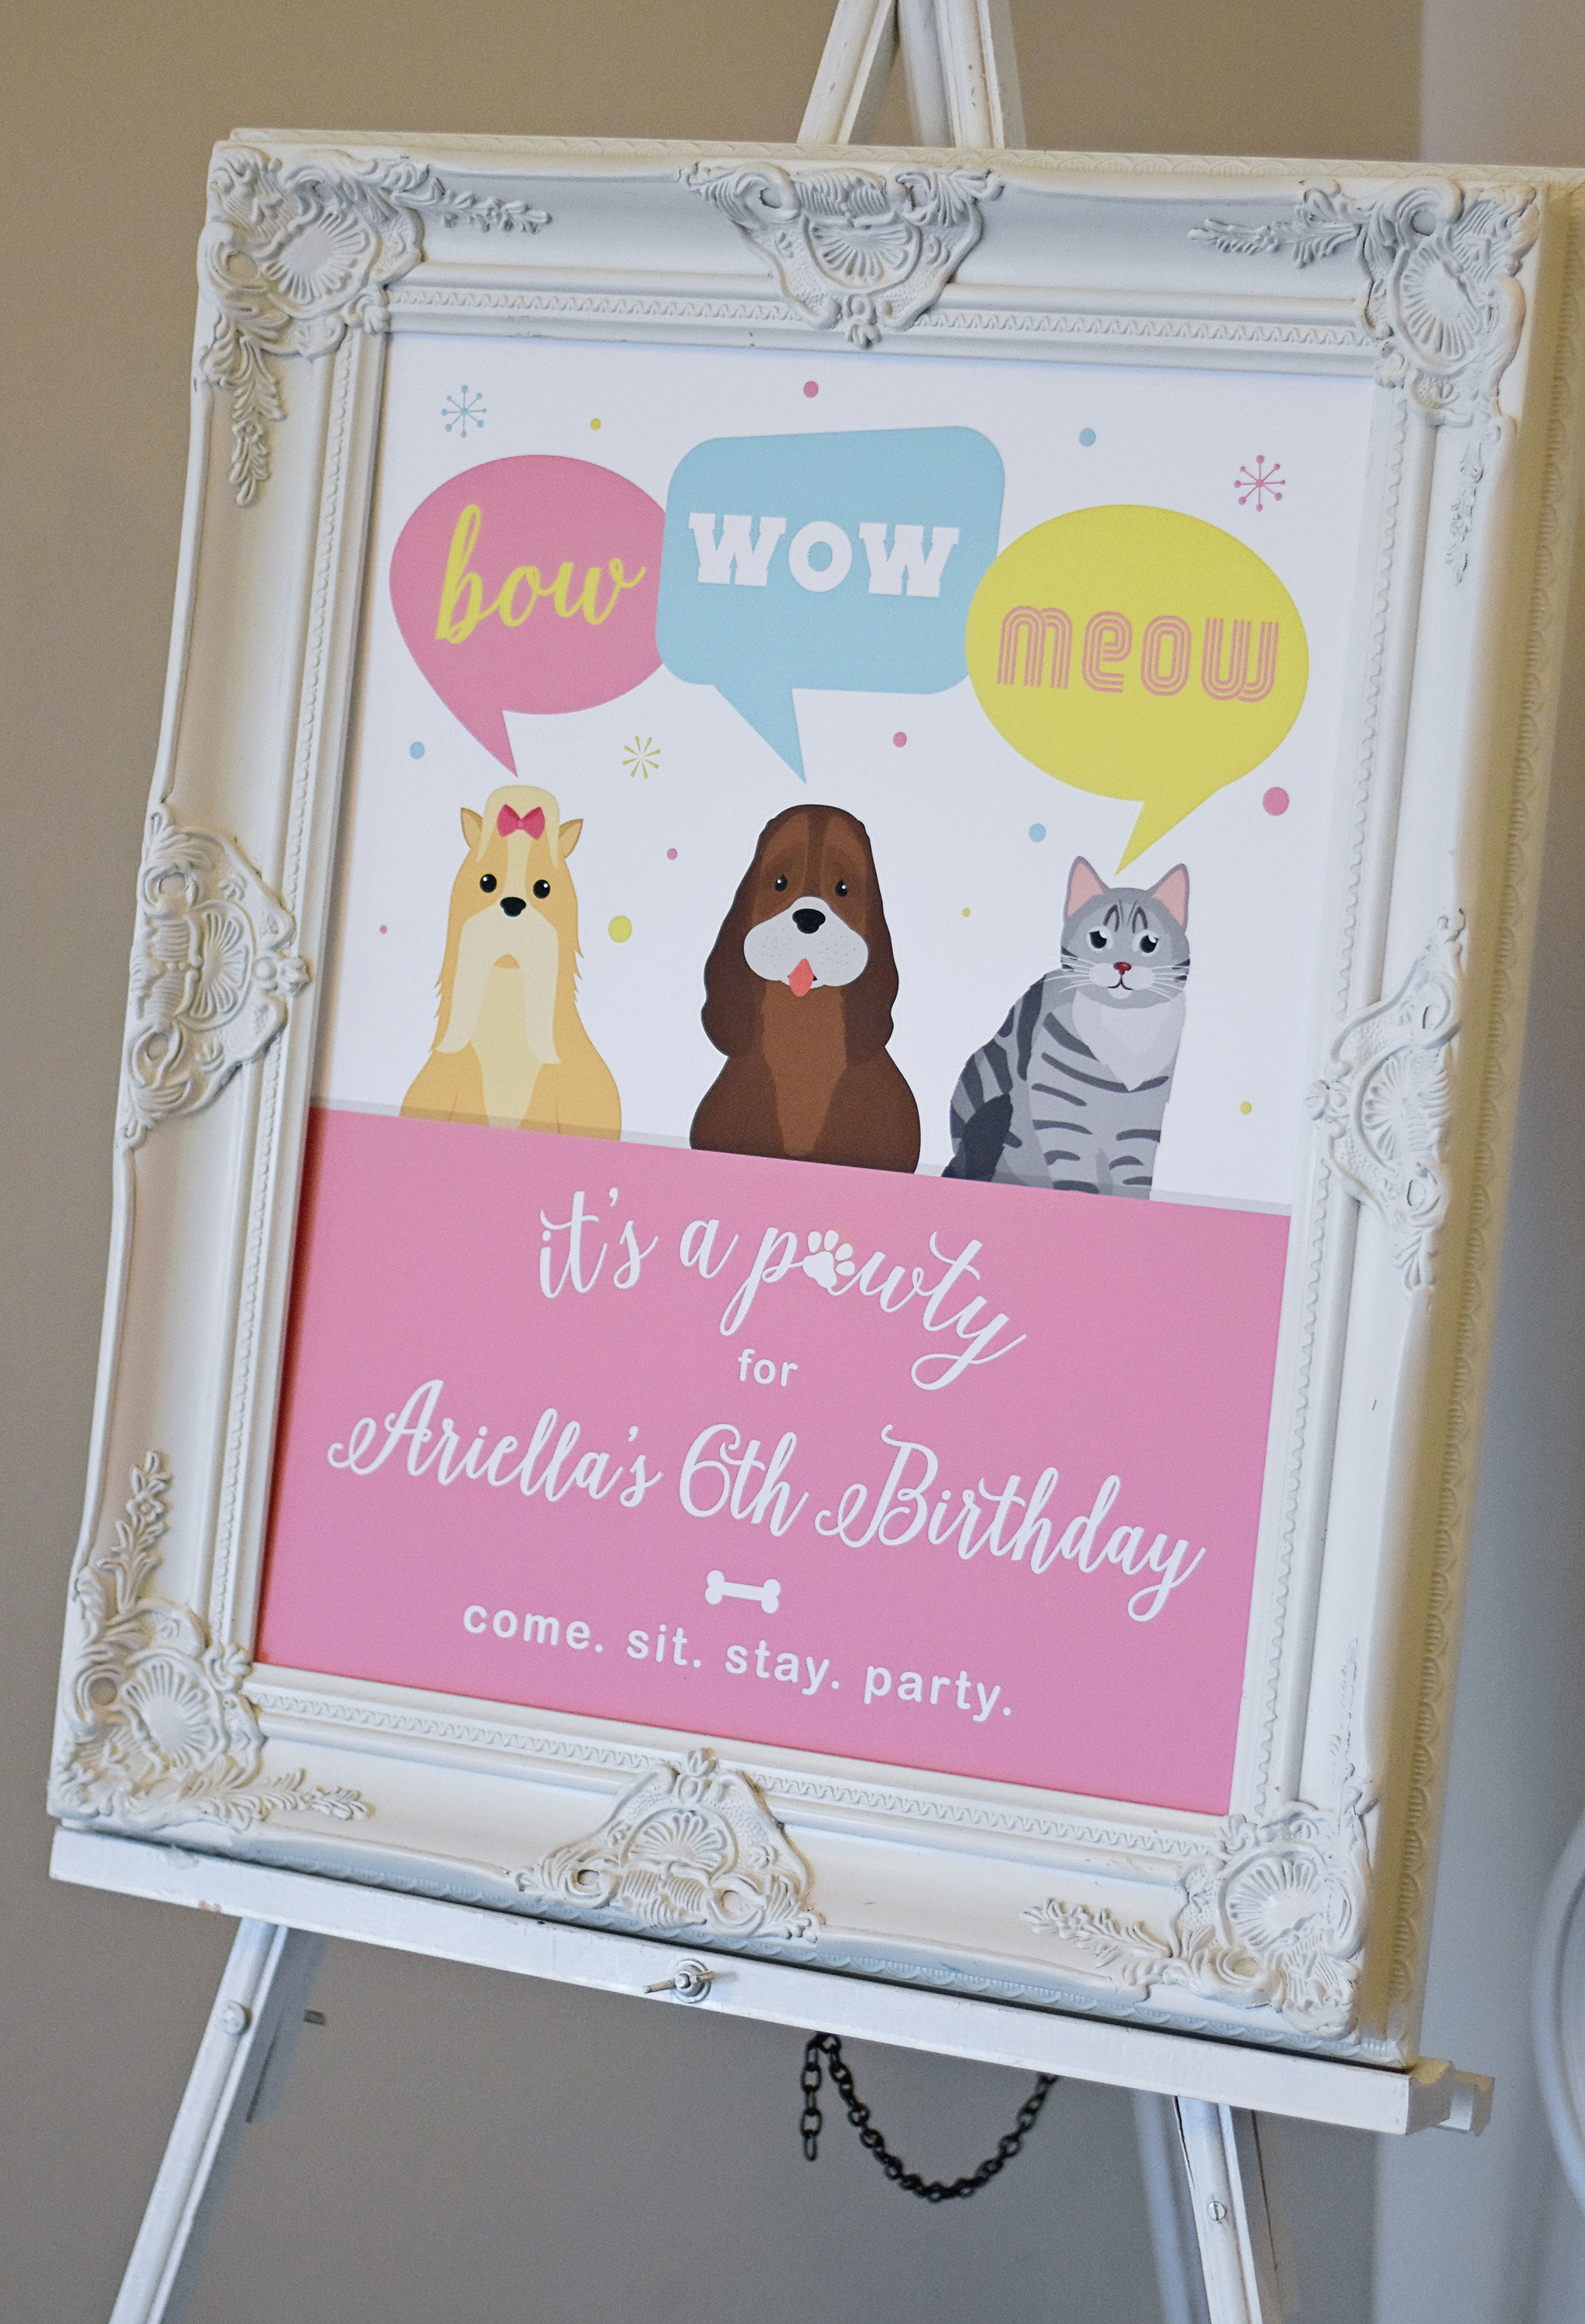 Printable party signage in a gorgeous frame!